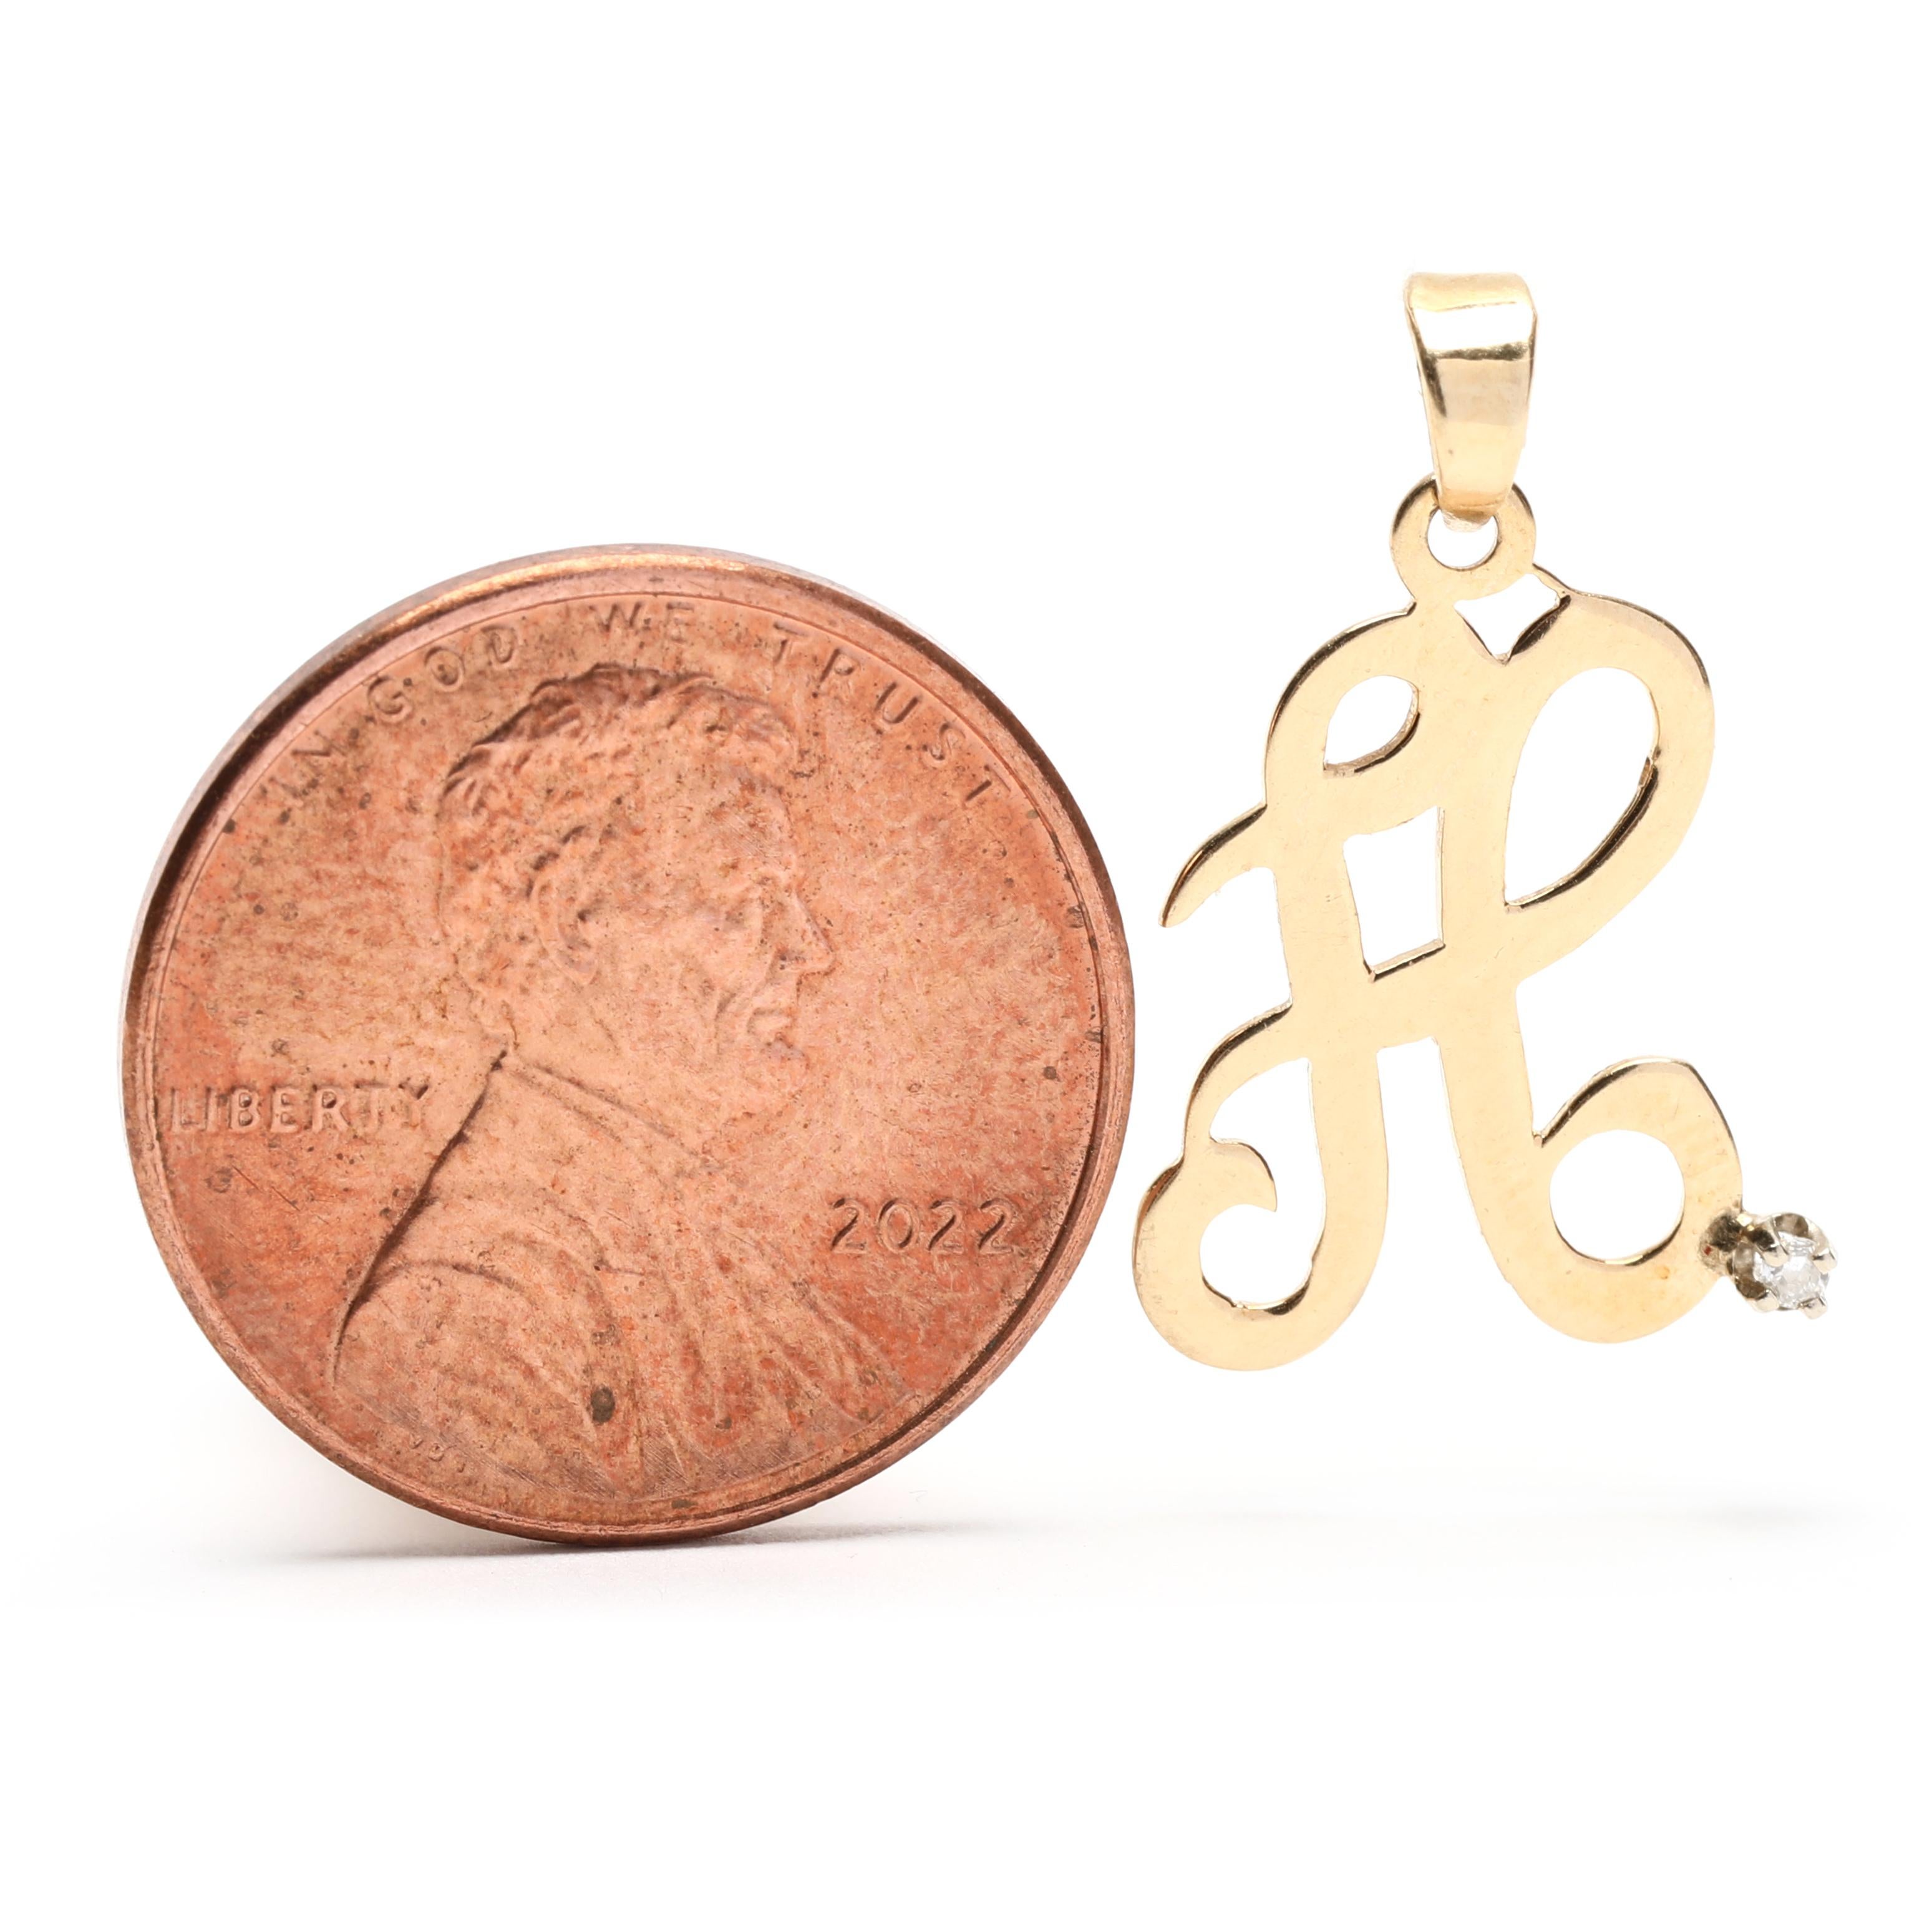 This 14K yellow gold initial charm is perfect for adding a personalized touch to any necklace or bracelet. The diamond script letter A is 3/4 inch in length and is flat in design. This elegant and timeless gold initial charm is the perfect way to